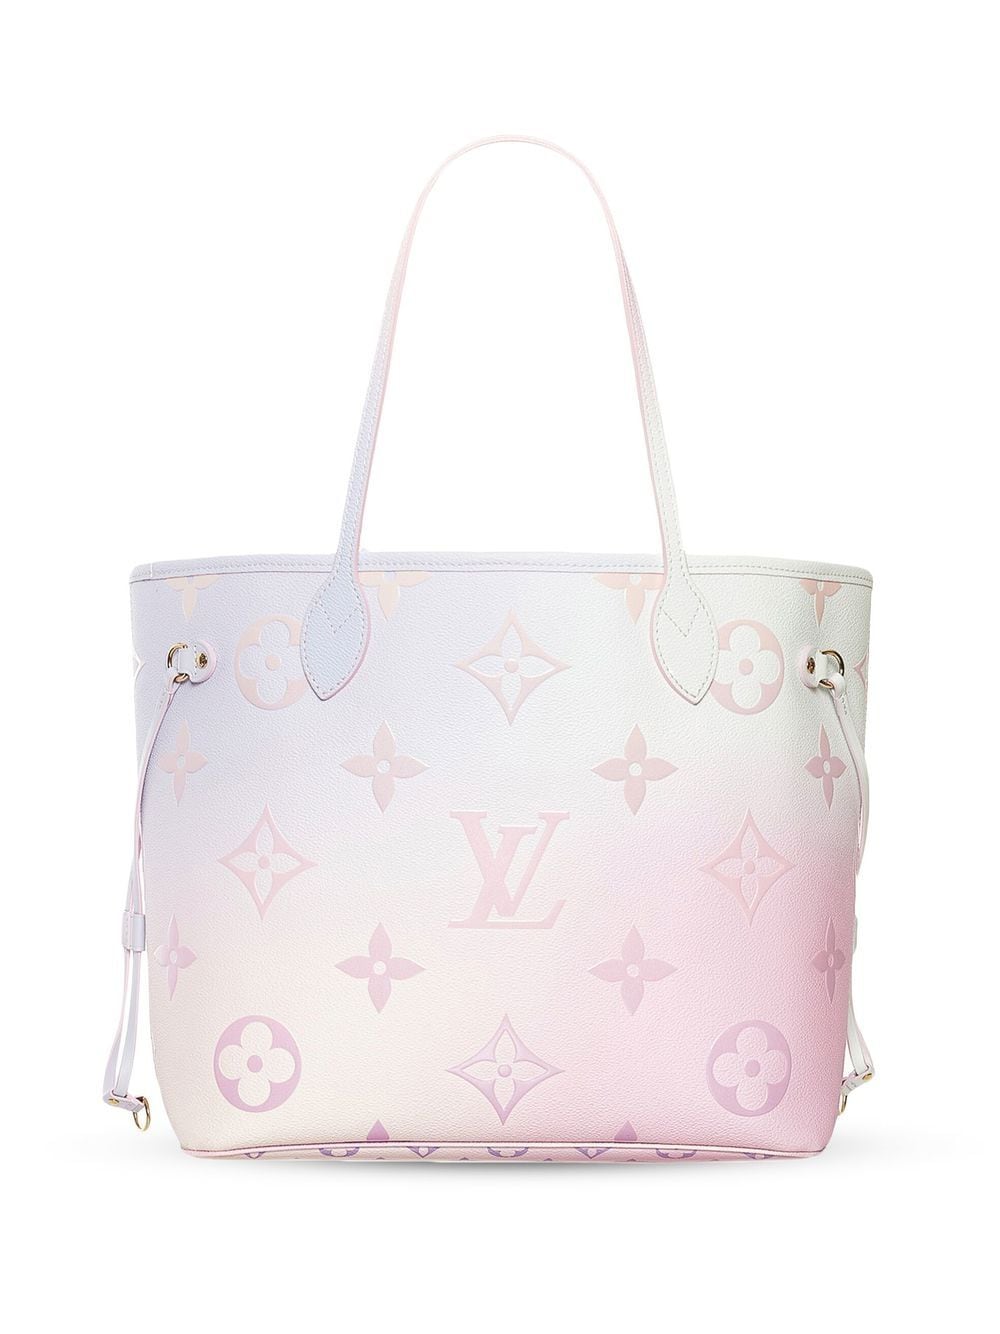 Louis Vuitton pre-owned Spring In The City Neverfull Handbag - Farfetch